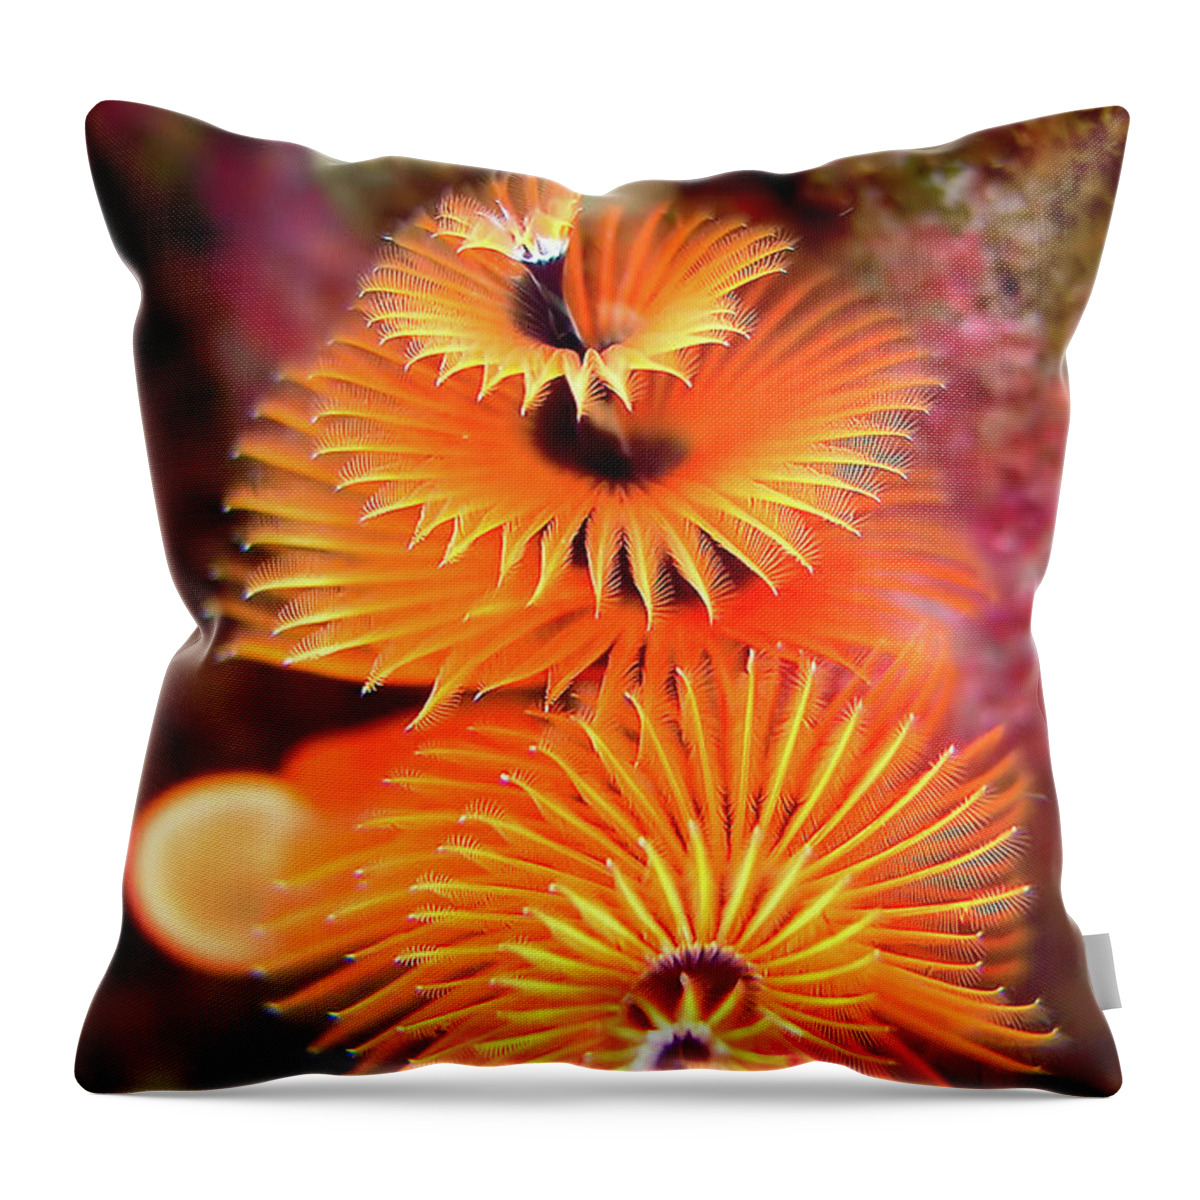 Animals Throw Pillow featuring the photograph Christmas Tree Worm by Joerg Lingnau